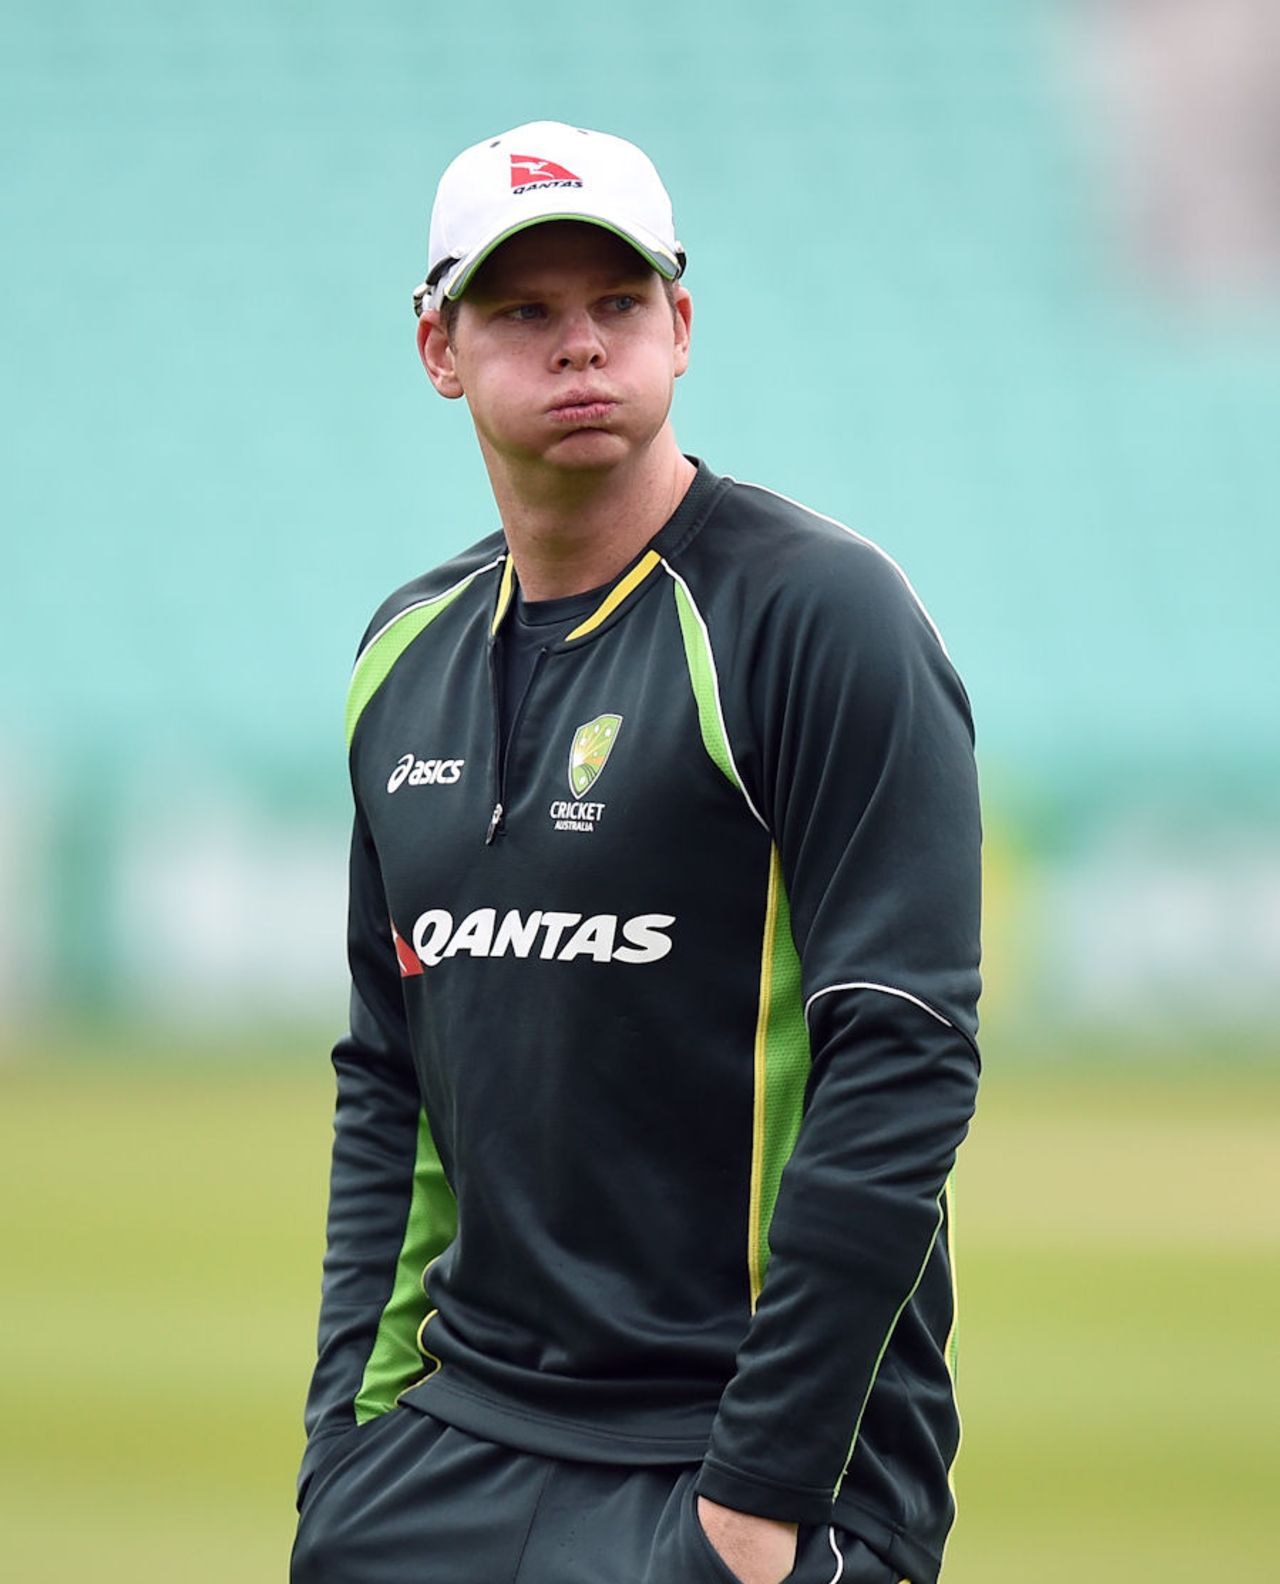 Steve Smith endures a chilly training session ahead of the final Investec Test at The Oval with the Ashes already relinquished